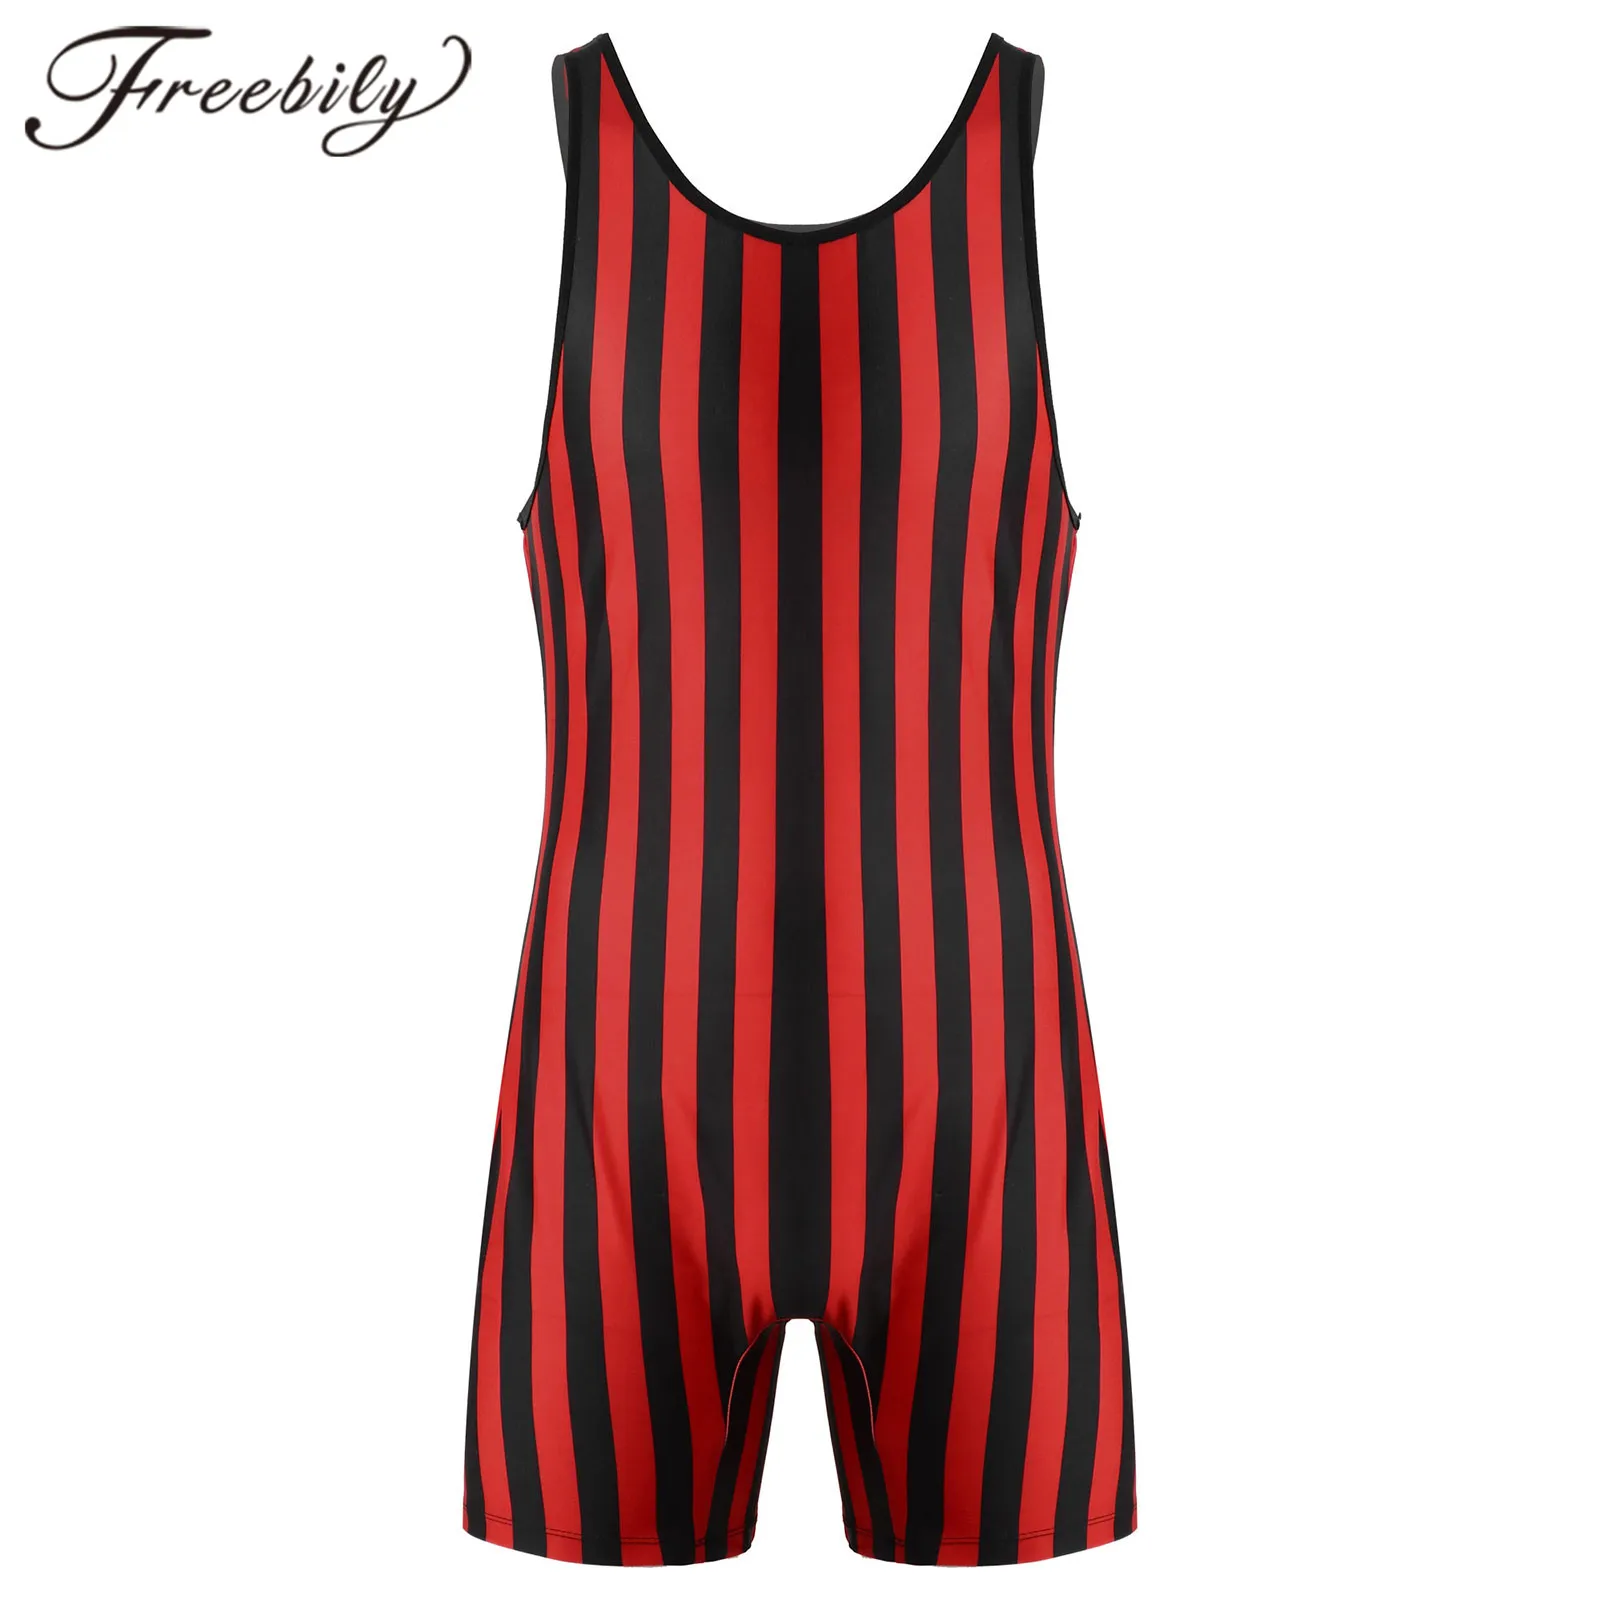 

Men Gymnastics Leotard Striped Wrestling Singlet Bodysuit Weight Lifting Stretchy Workout Fitness Outfits Athletic Jumpsuit Male